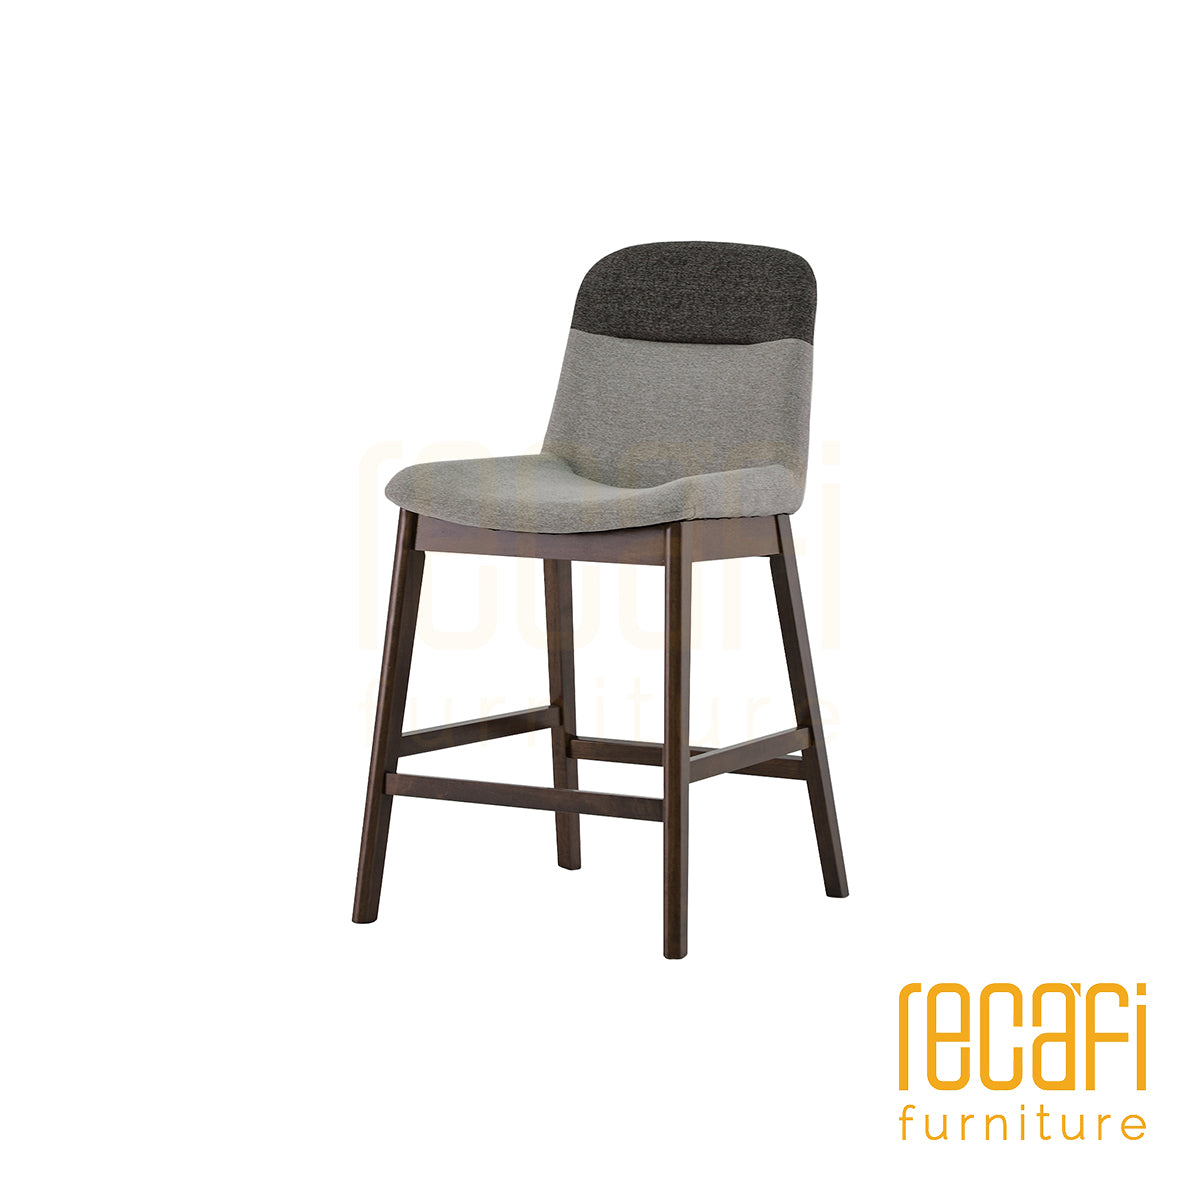 <b> Nook Counter Height Dining Chair </b><br> W480 X D540 X H950MM SEAT HEIGHT : 640MM